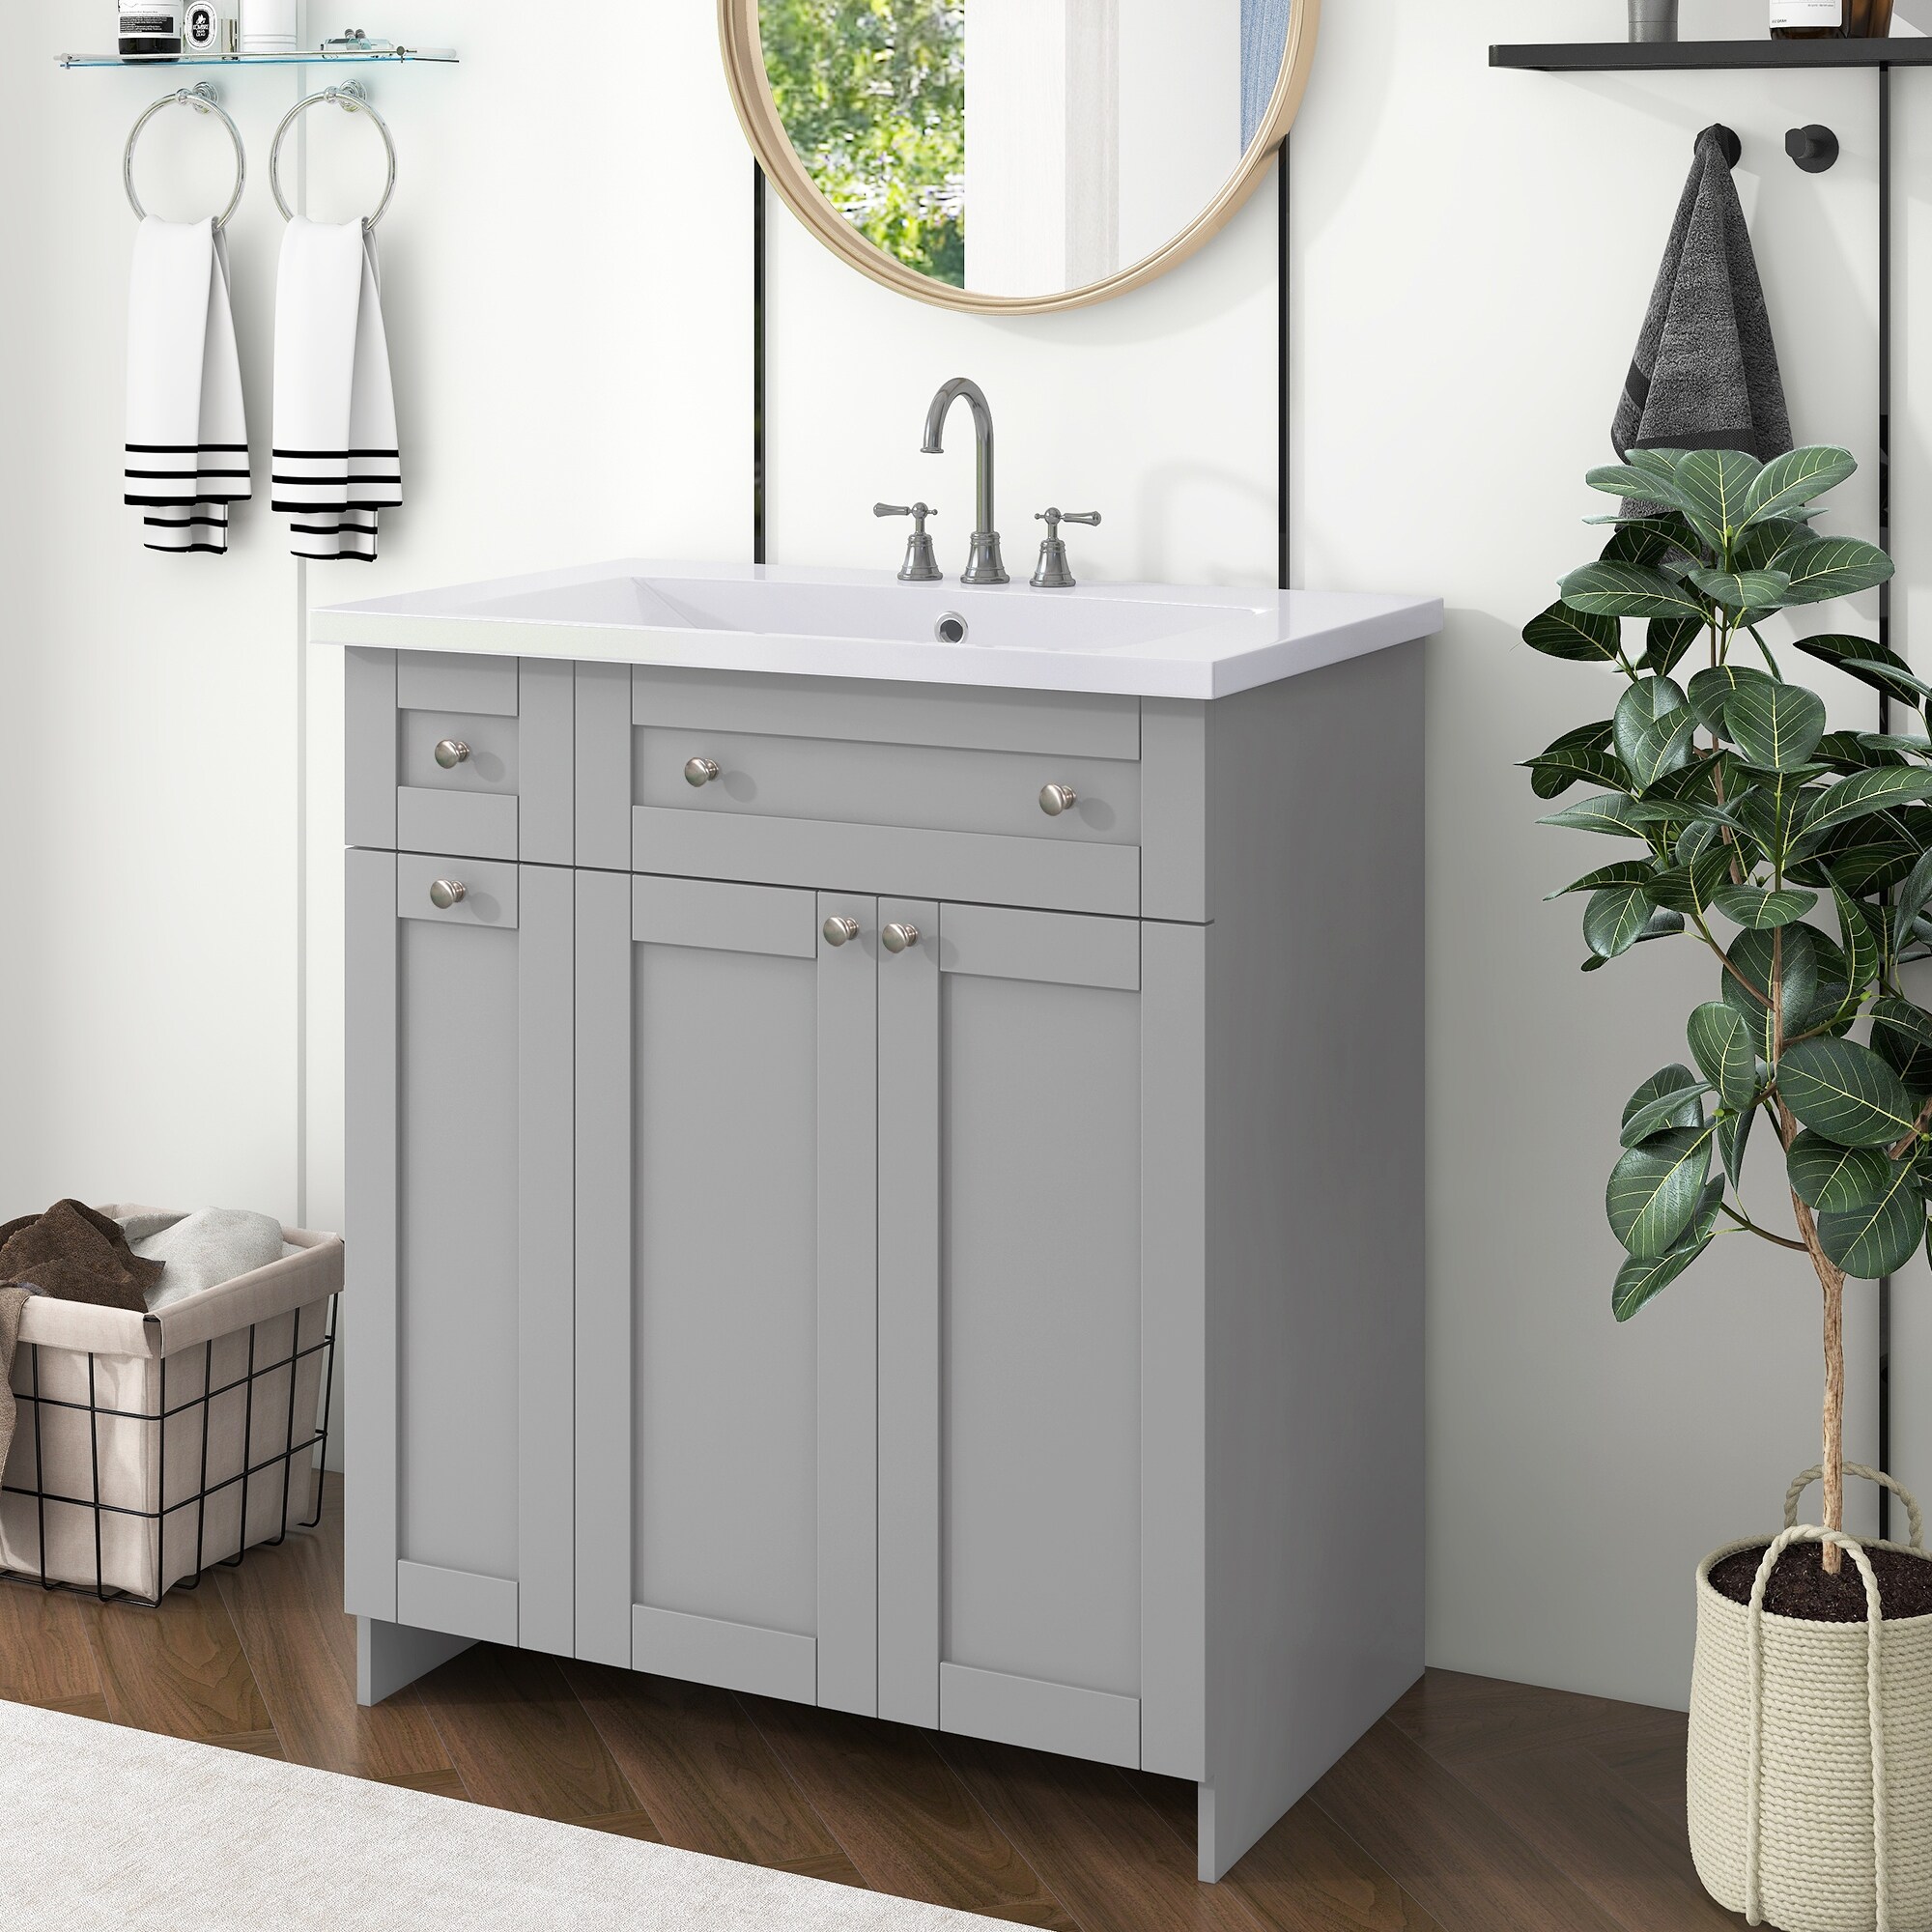 https://ak1.ostkcdn.com/images/products/is/images/direct/2d2fd5f40cd47d43ef069ffd33f26ecac98ec66a/30%22-Bathroom-vanity-with-Single-Sink-Combo-Cabinet-Undermount-Sink%2CBathroom-Storage-Cabinet%2CSolid-Wood-Frame.jpg